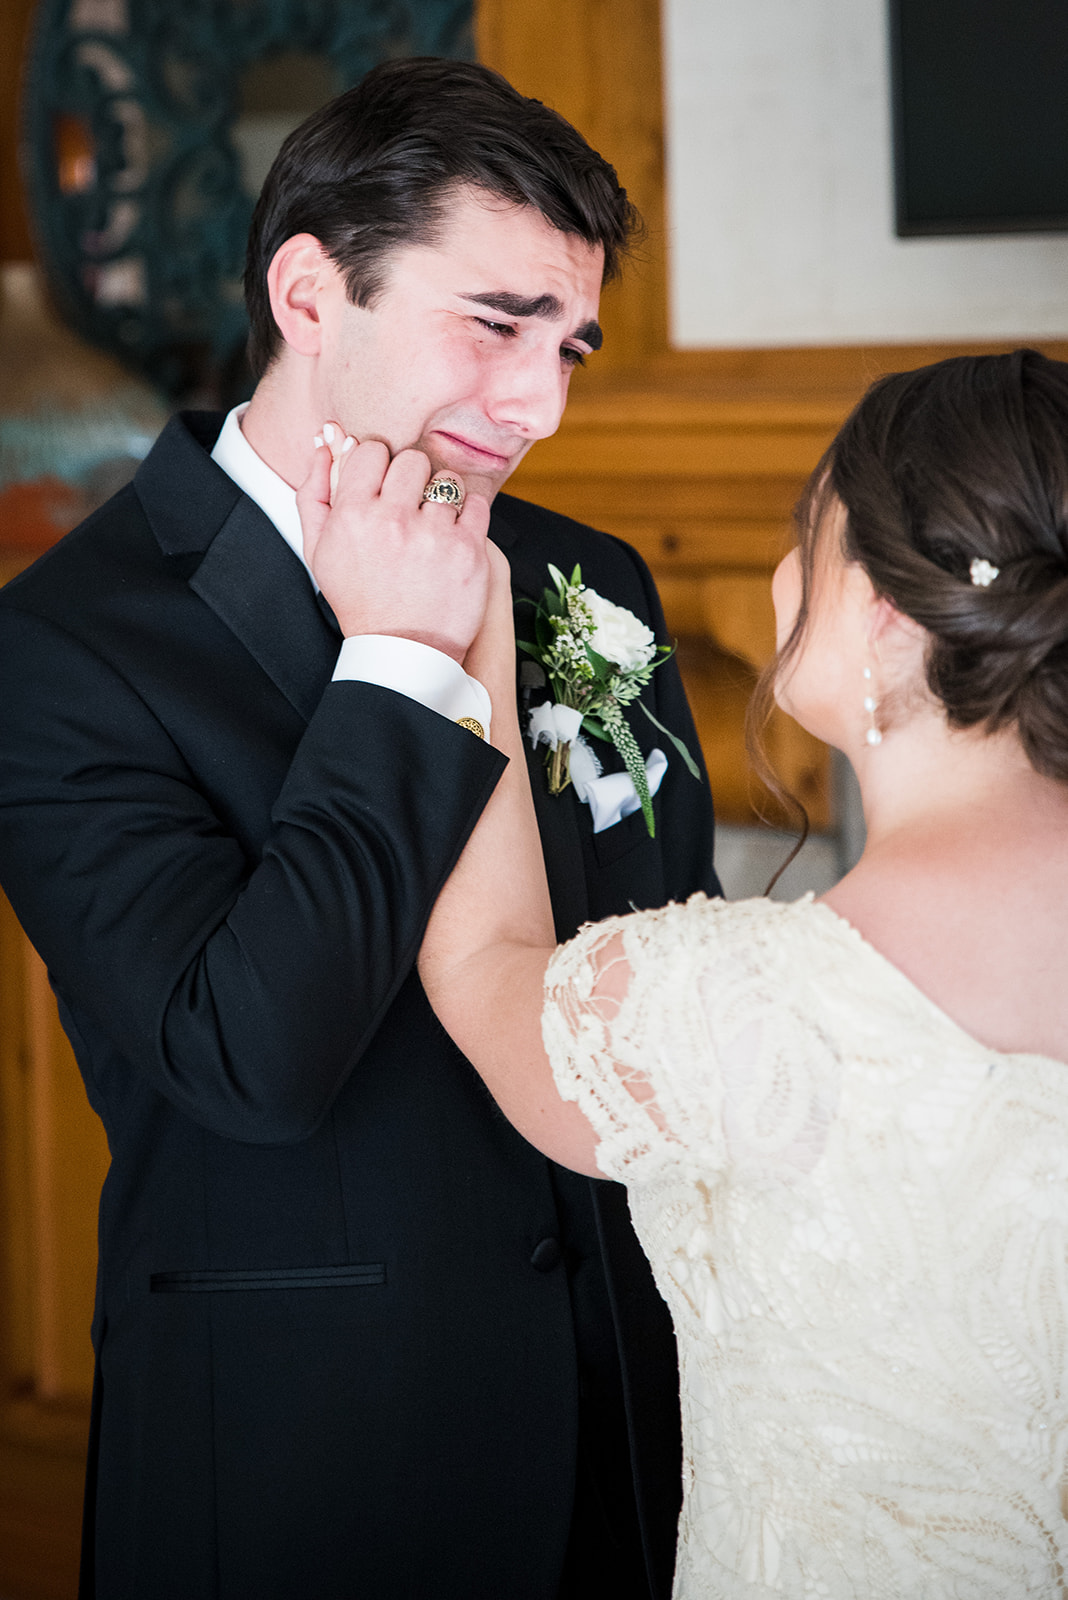 Groom holds bride's hand close to his face as she wipes a tear from his eye.